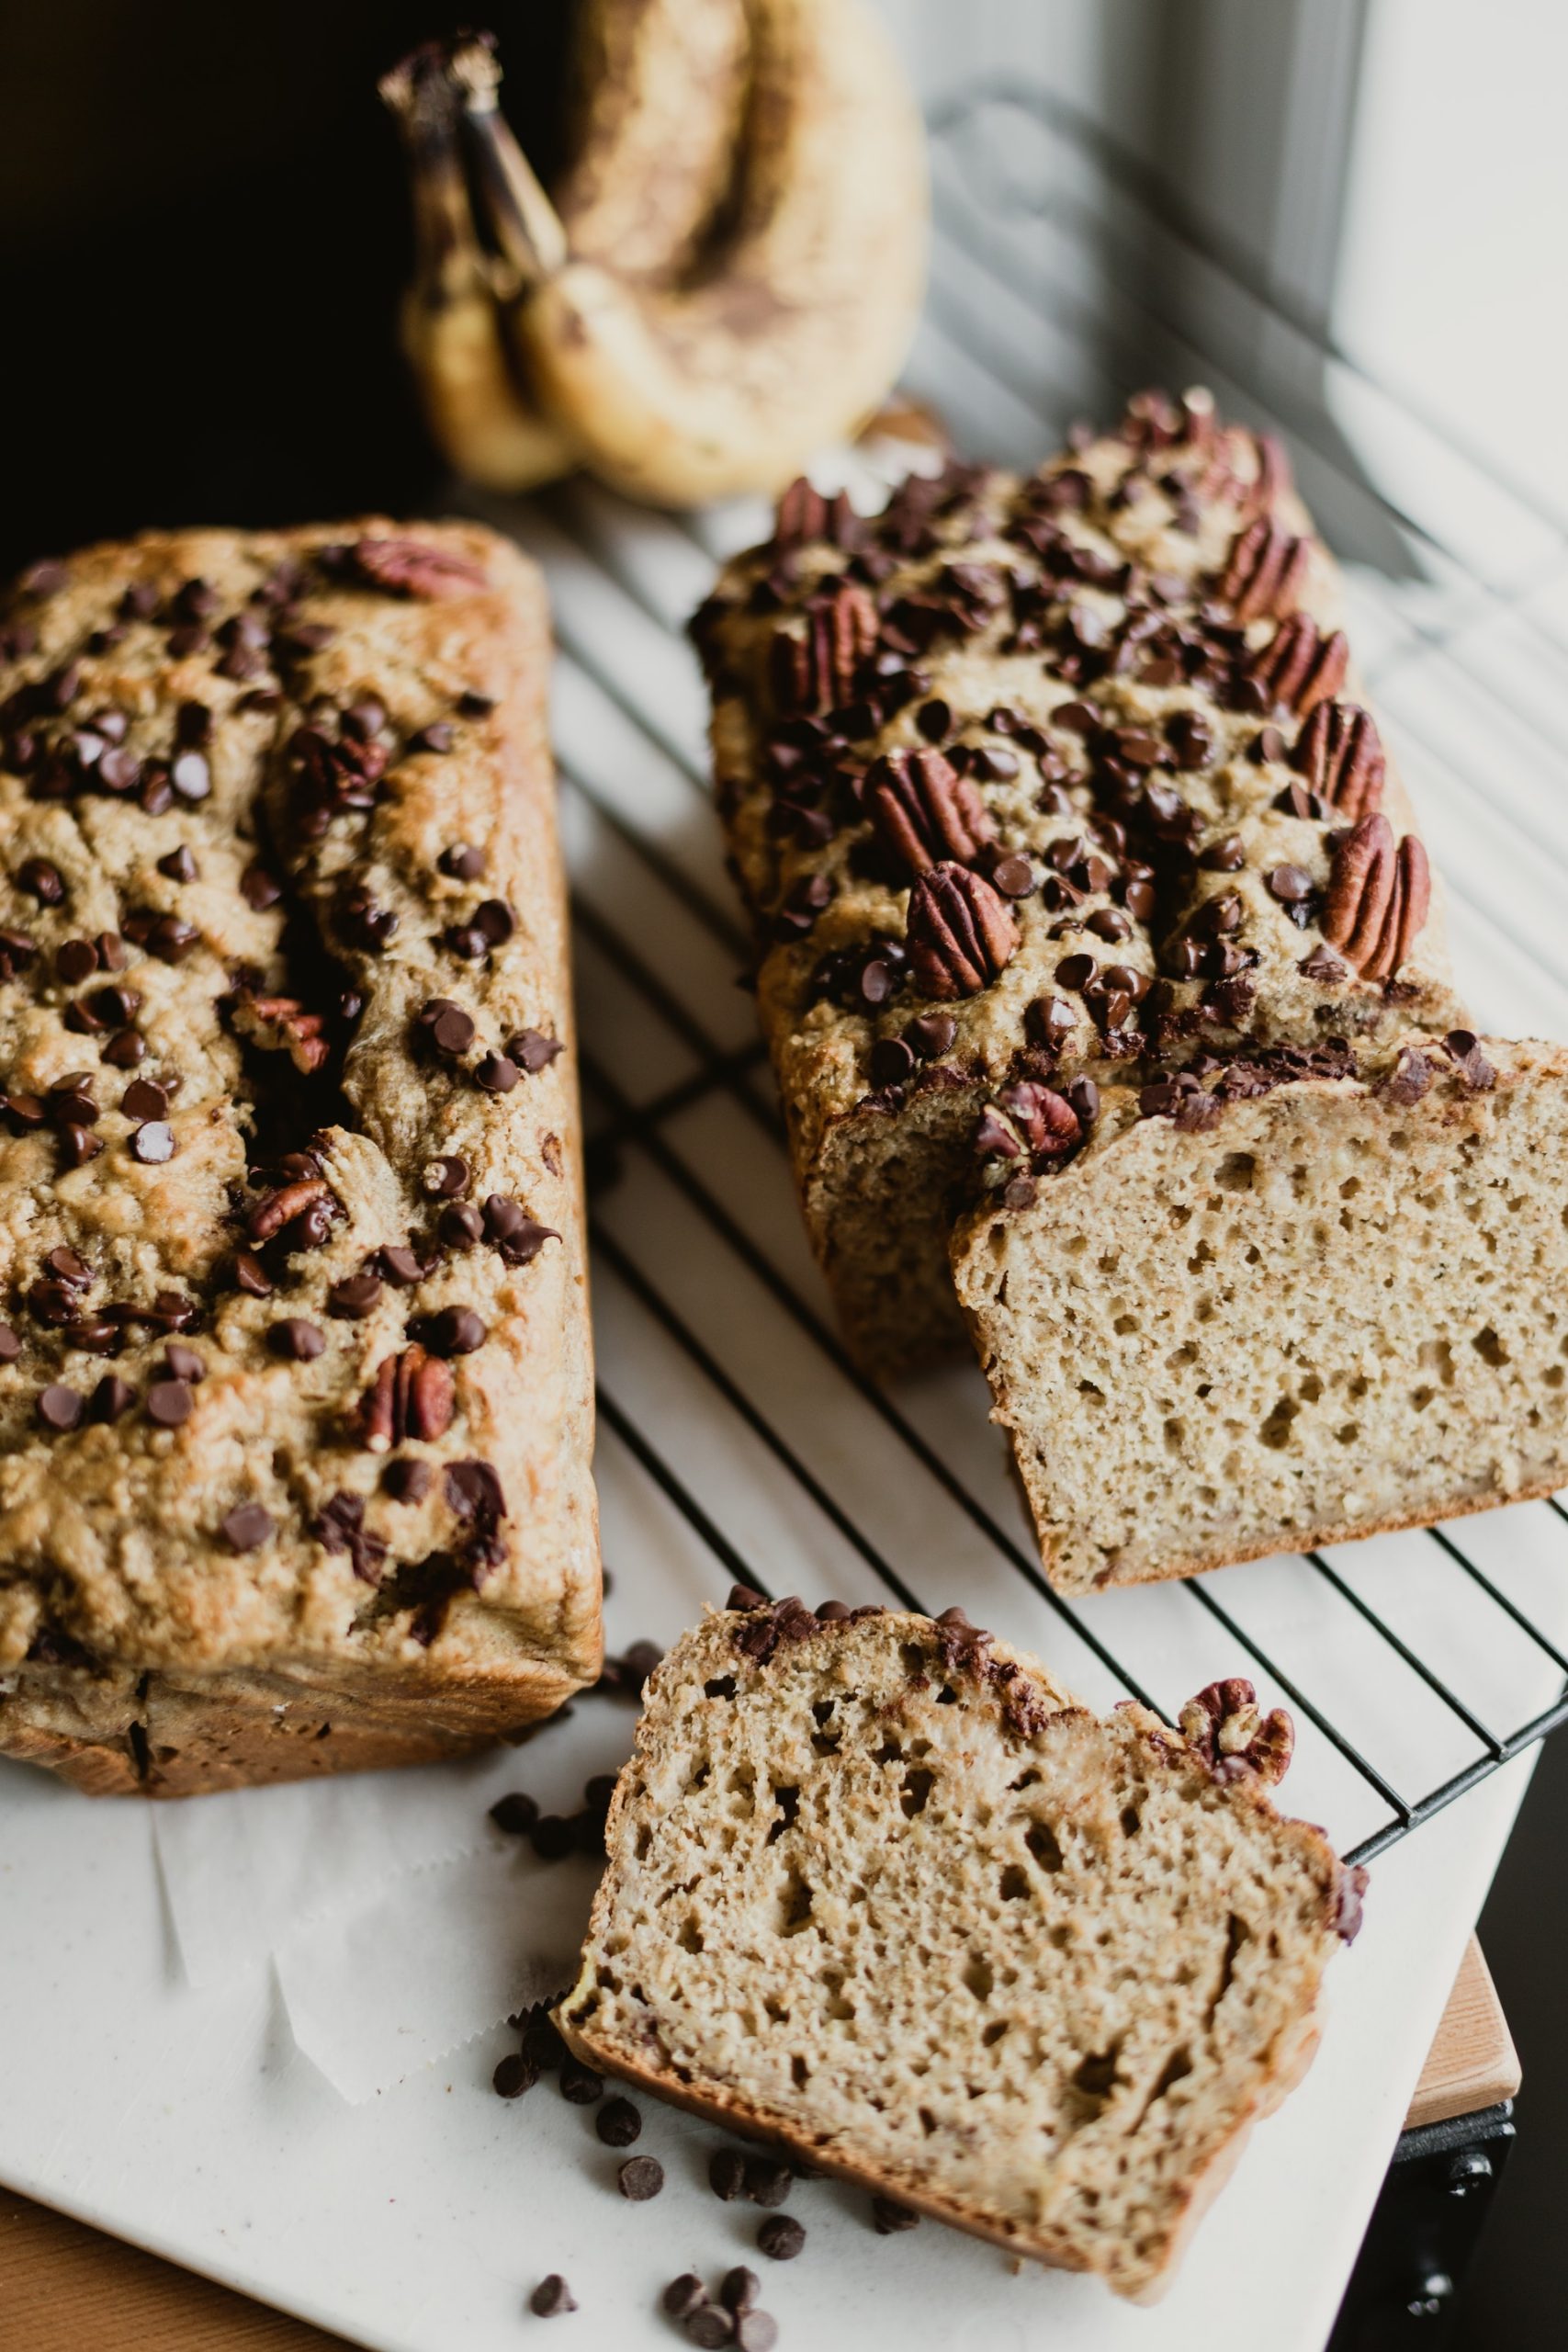 Heavenly Combination: Discover the Magic of Chocolate Chip Banana Bread